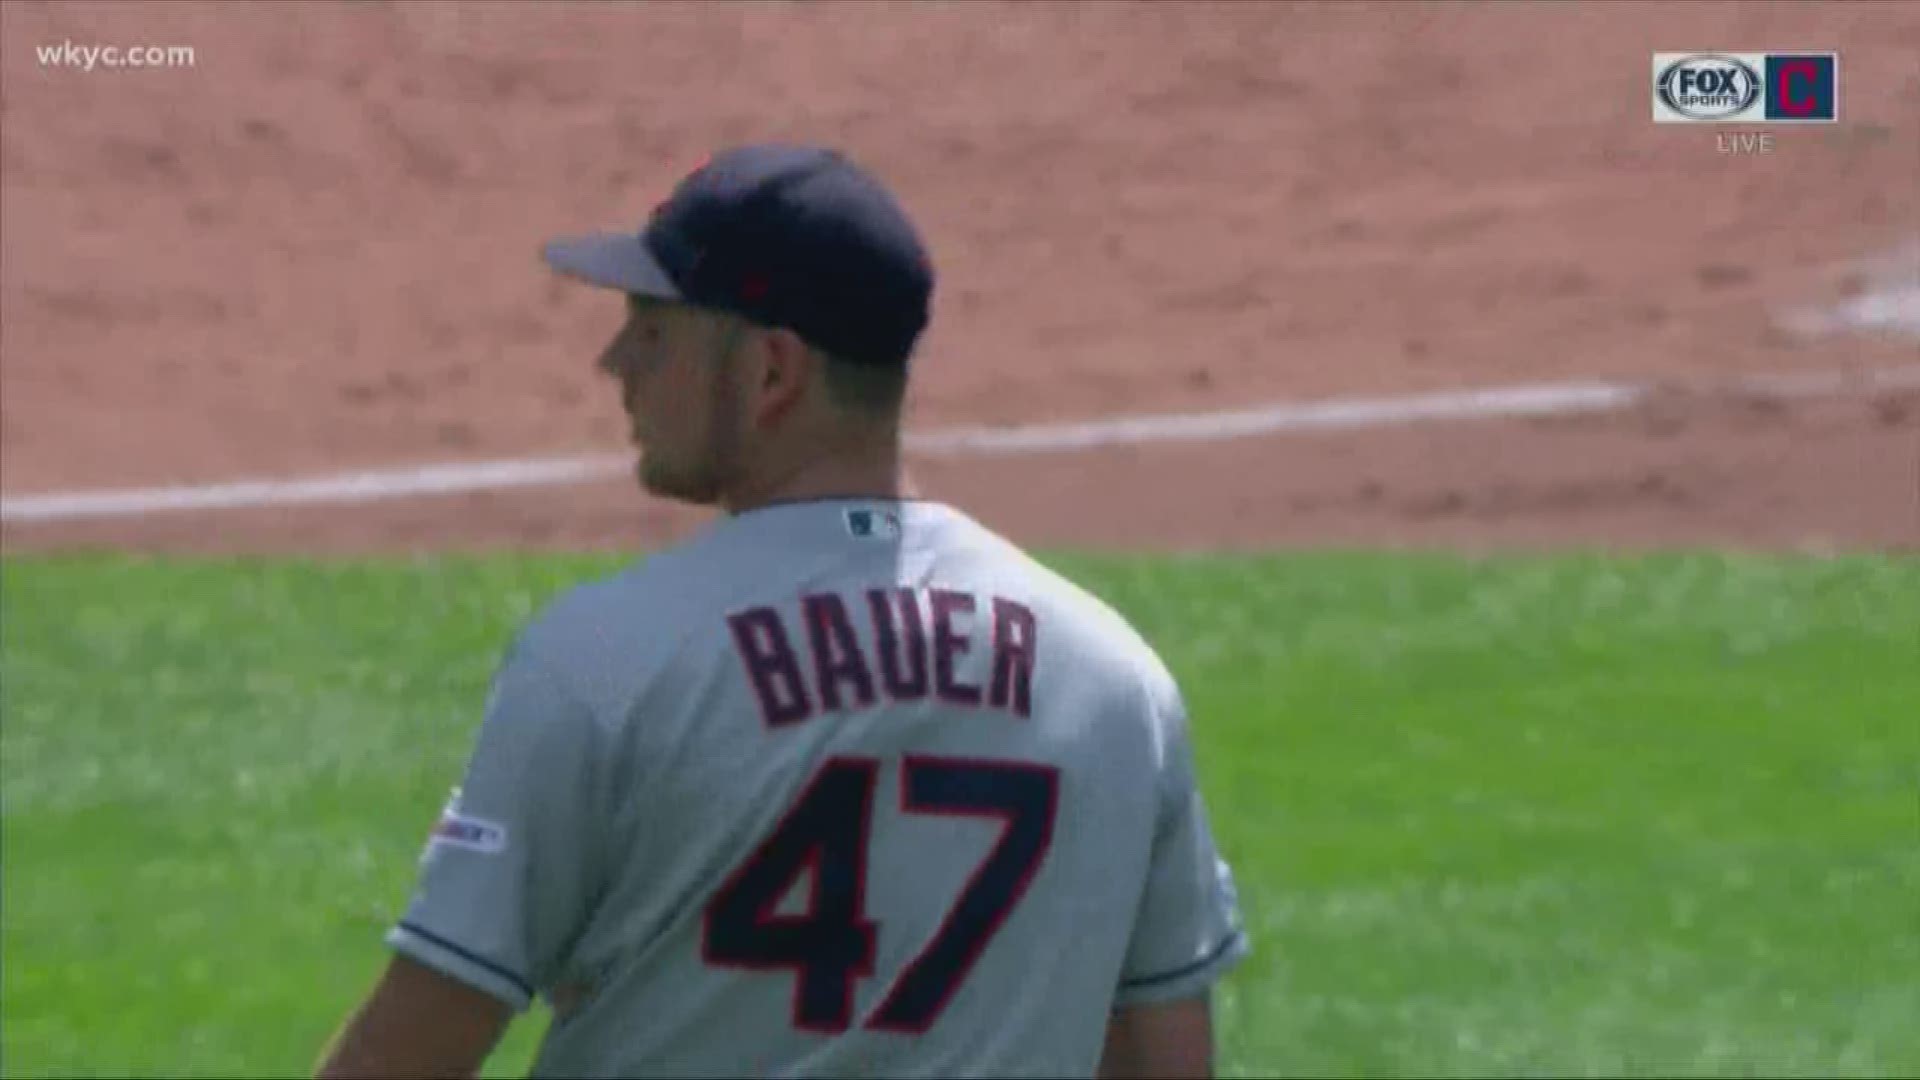 Trevor Bauer to be fined for chucking ball during game